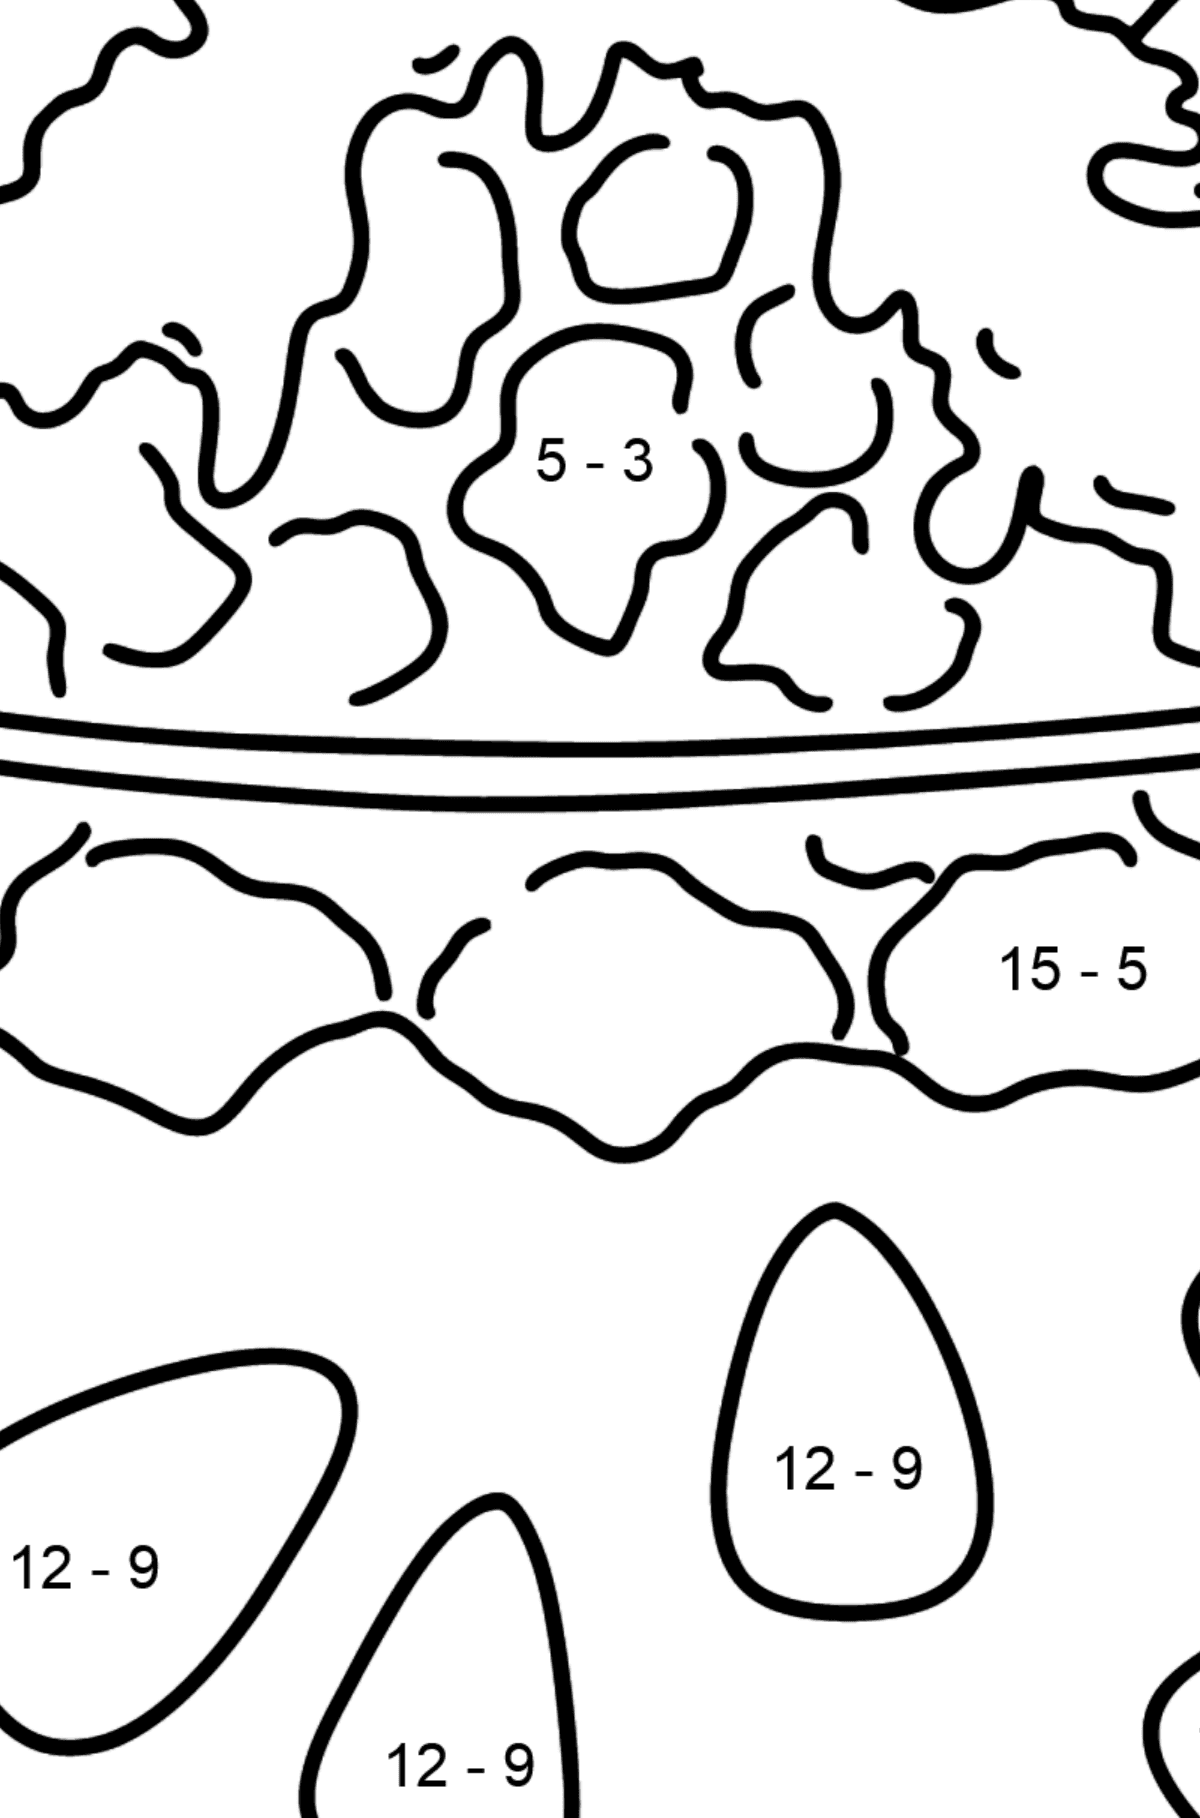 Strawberry Flakes coloring page - Math Coloring - Subtraction for Kids